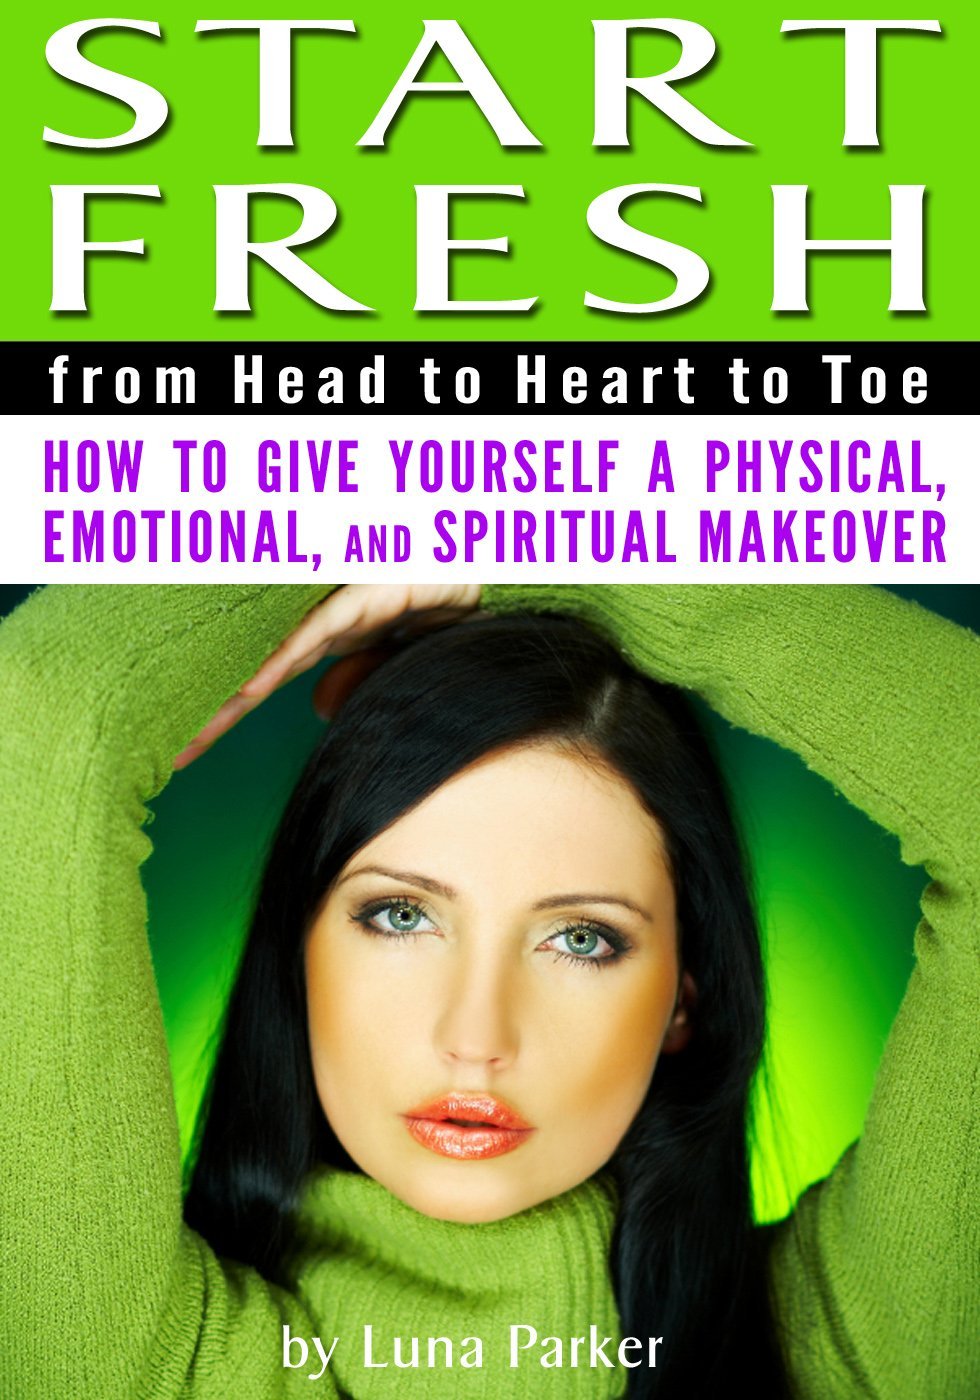 FREE: Start Fresh from Head to Heart to Toe: How to Give Yourself a Physical, Emotional, and Spiritual Makeover by Luna Parker